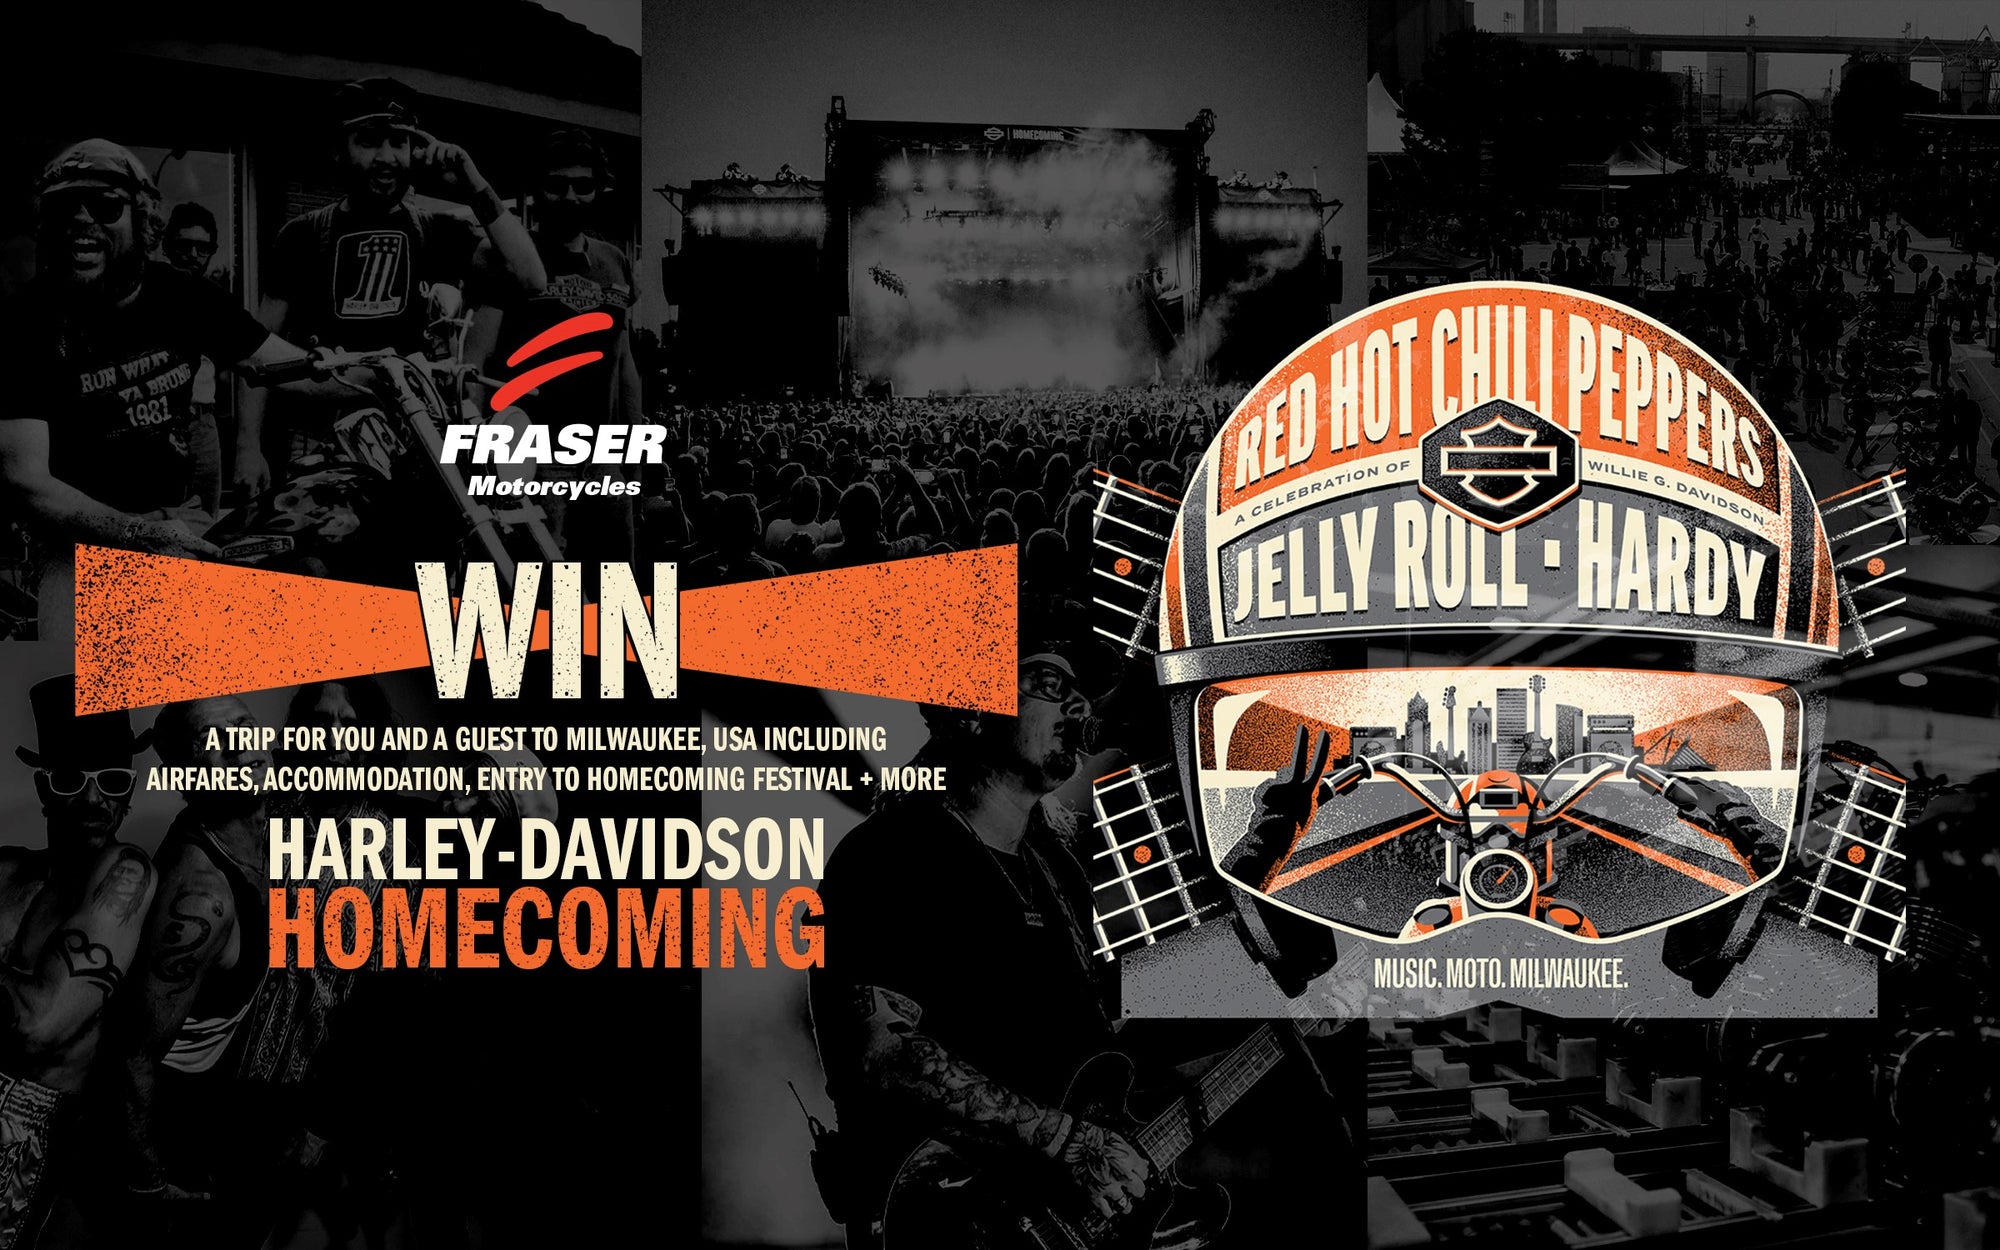 WIN a trip for 2 to the Harley-Davidson Milwaukee Homecoming festival!